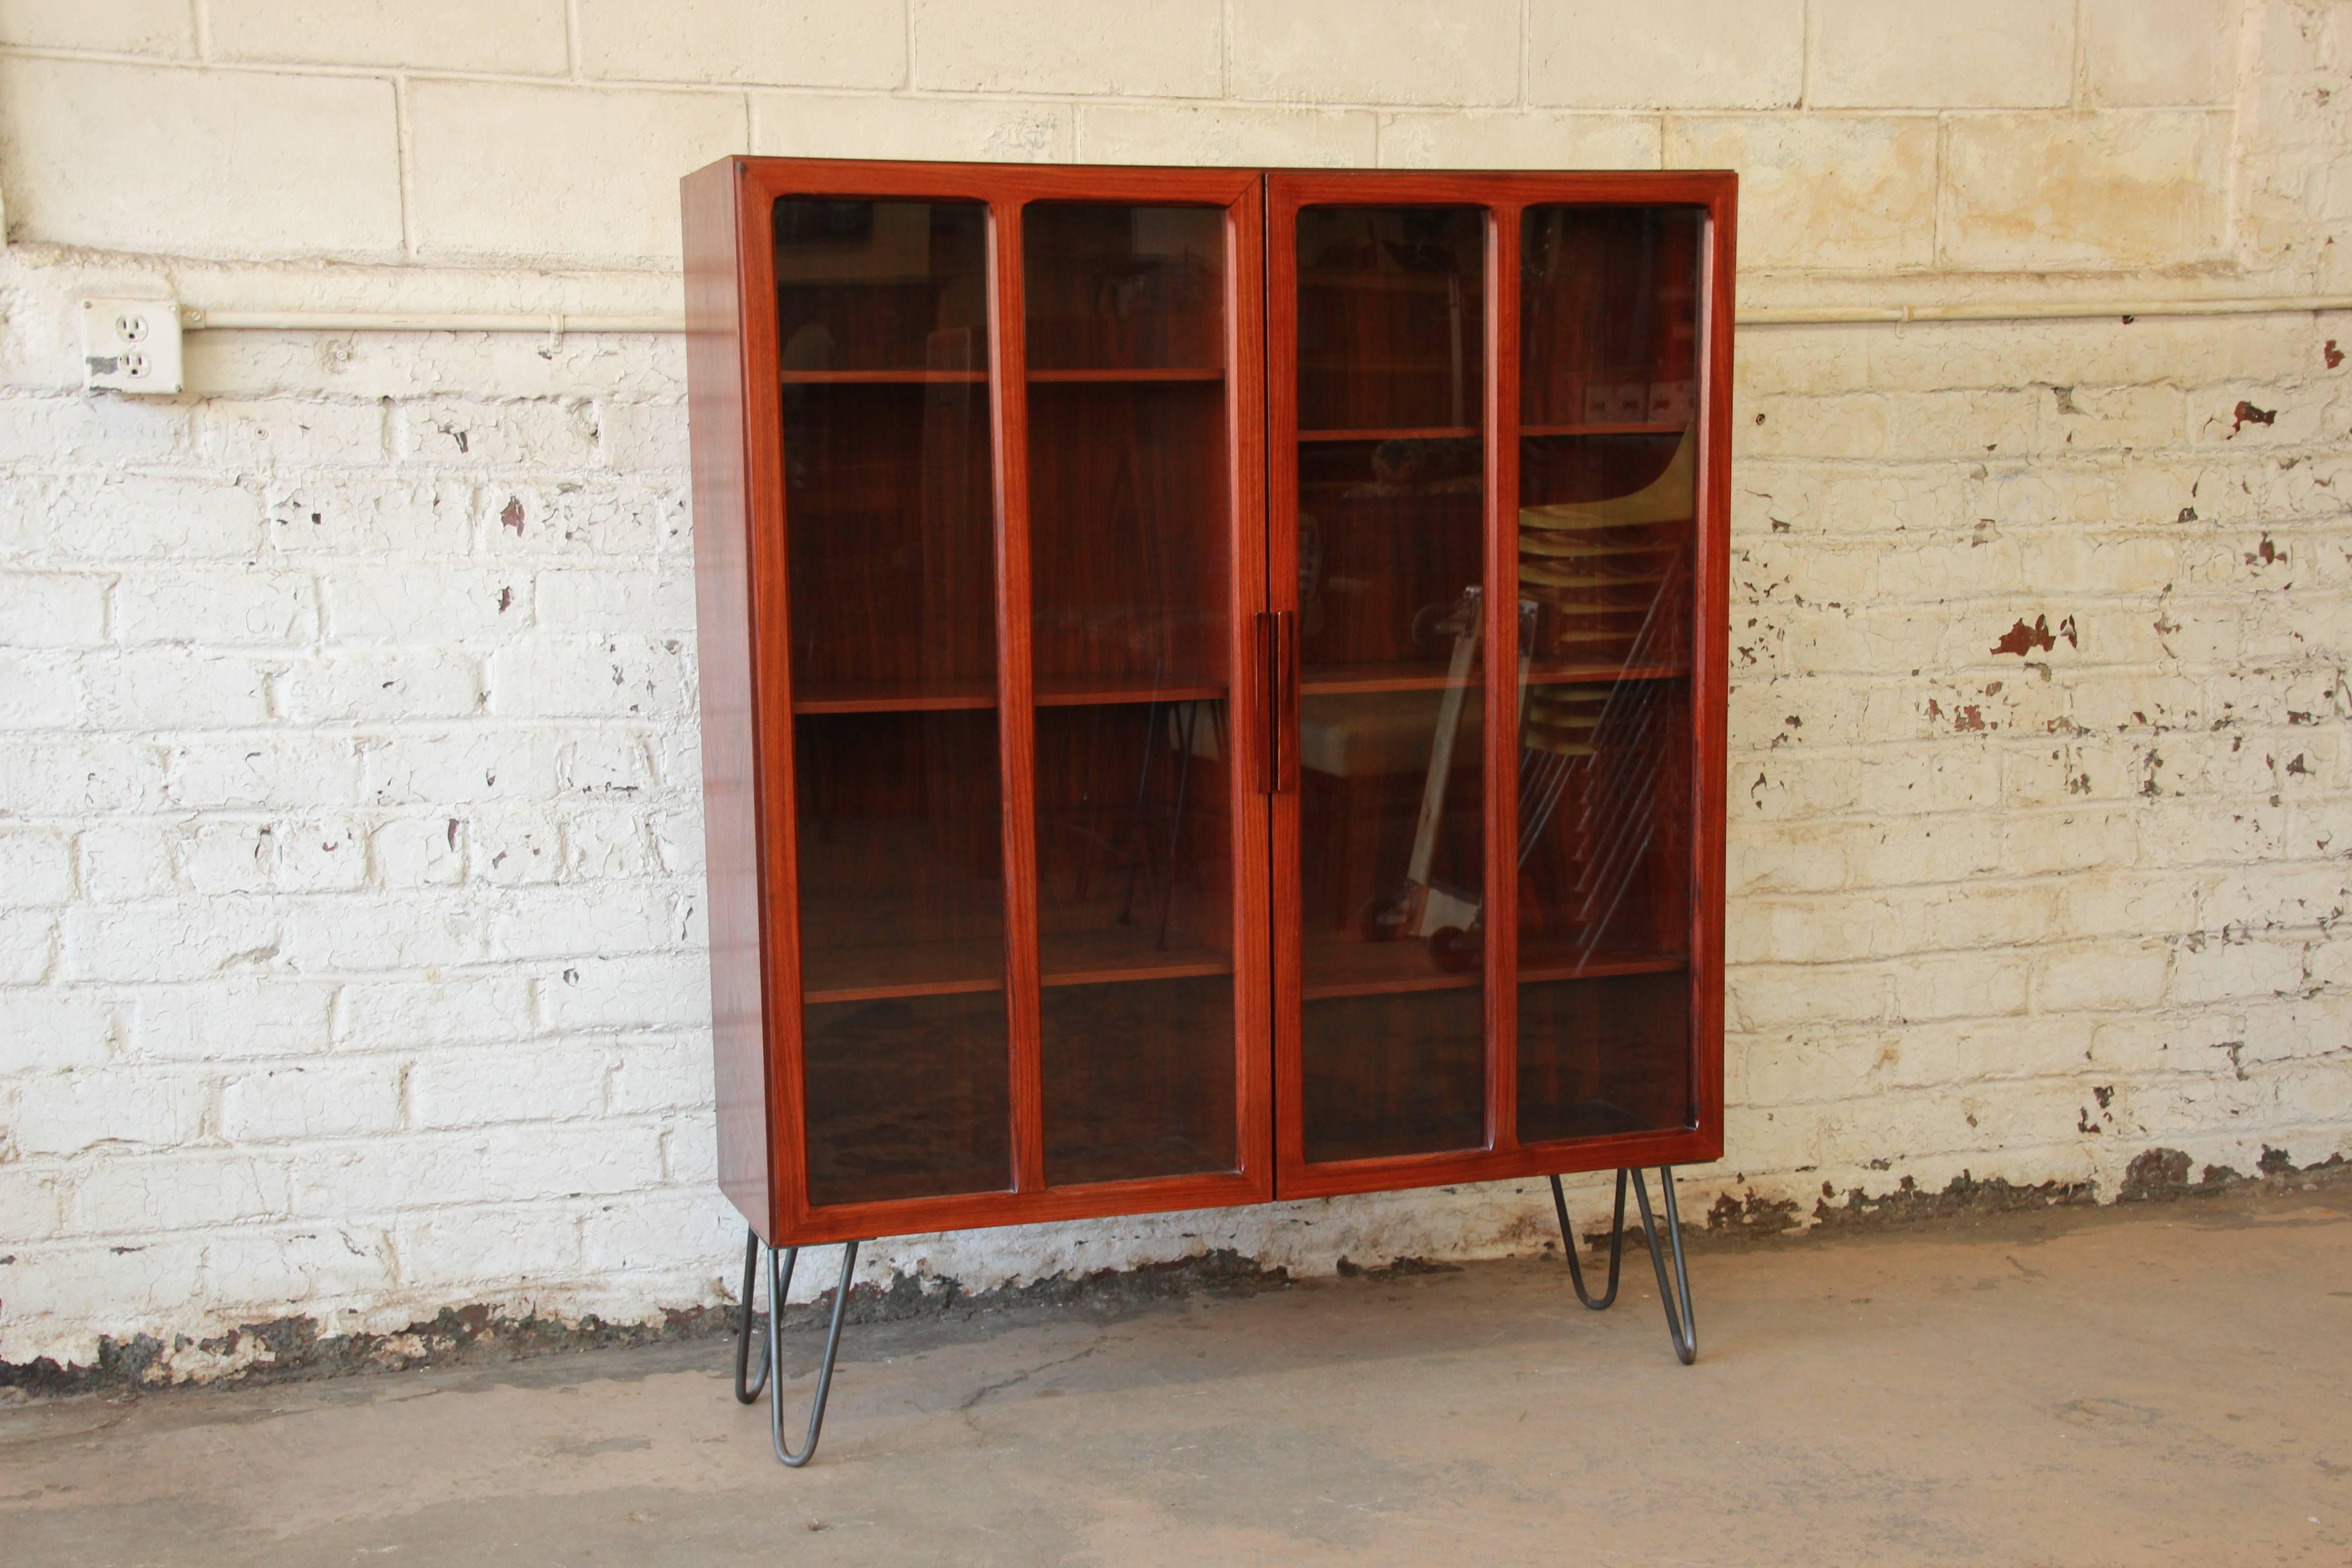 Danish Modern rosewood glass front bookcase or display cabinet designed by Ib Kofod Larsen for Faarup Møbelfabrik, circa 1960s. The bookcase features stunning wood grain and clean, sleek Mid-Century lines. The case rests on stylish metal hairpin